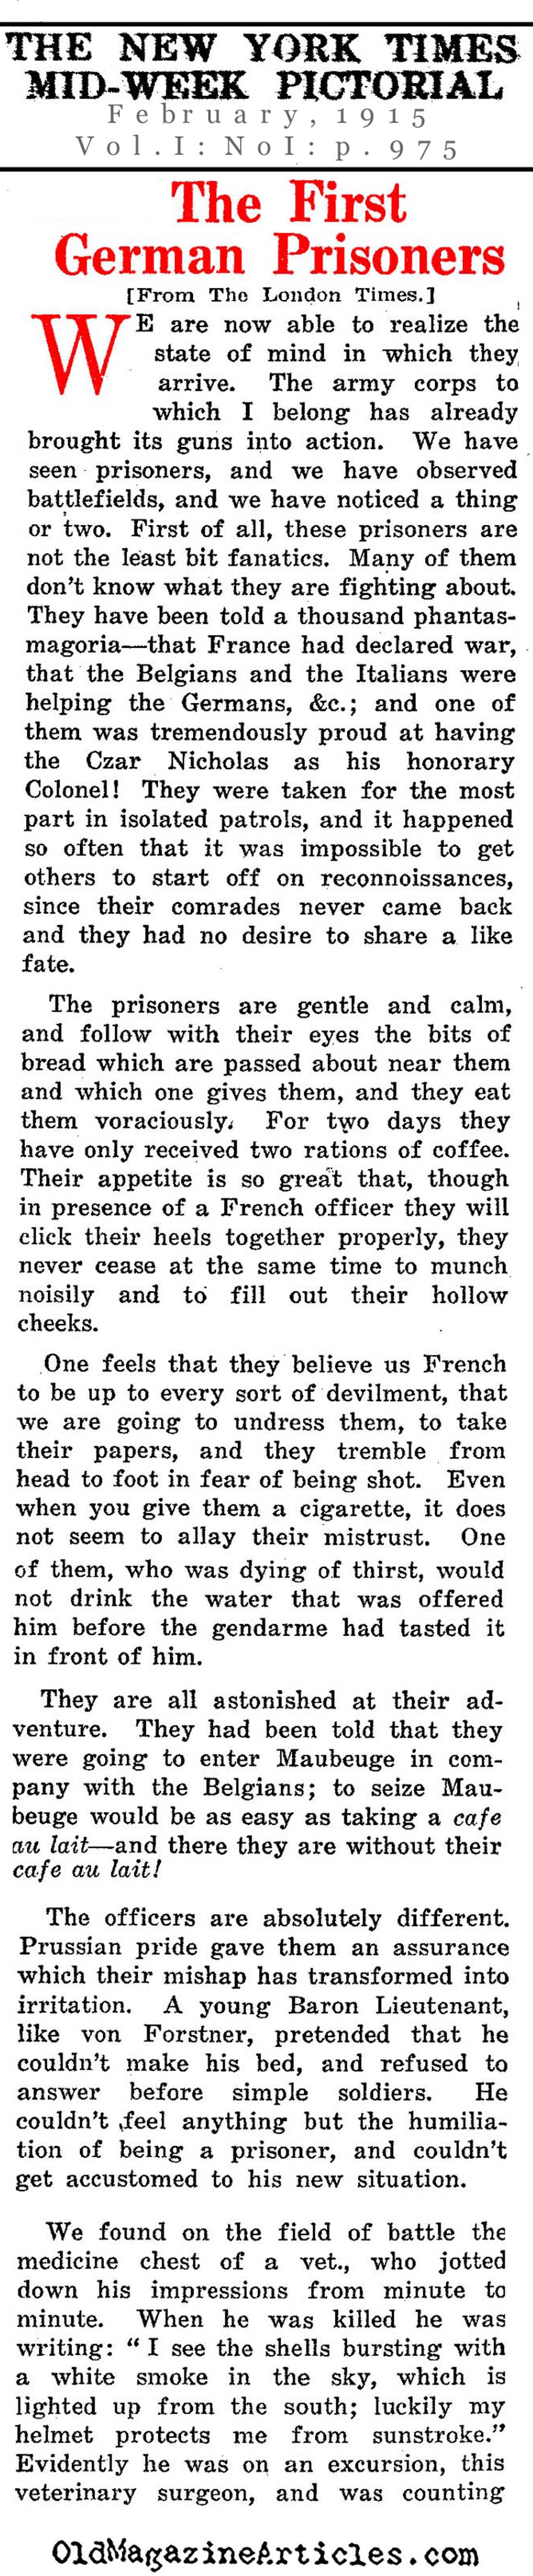 A Letter from One Who Saw the First German Prisoners (NY Times, 1915)